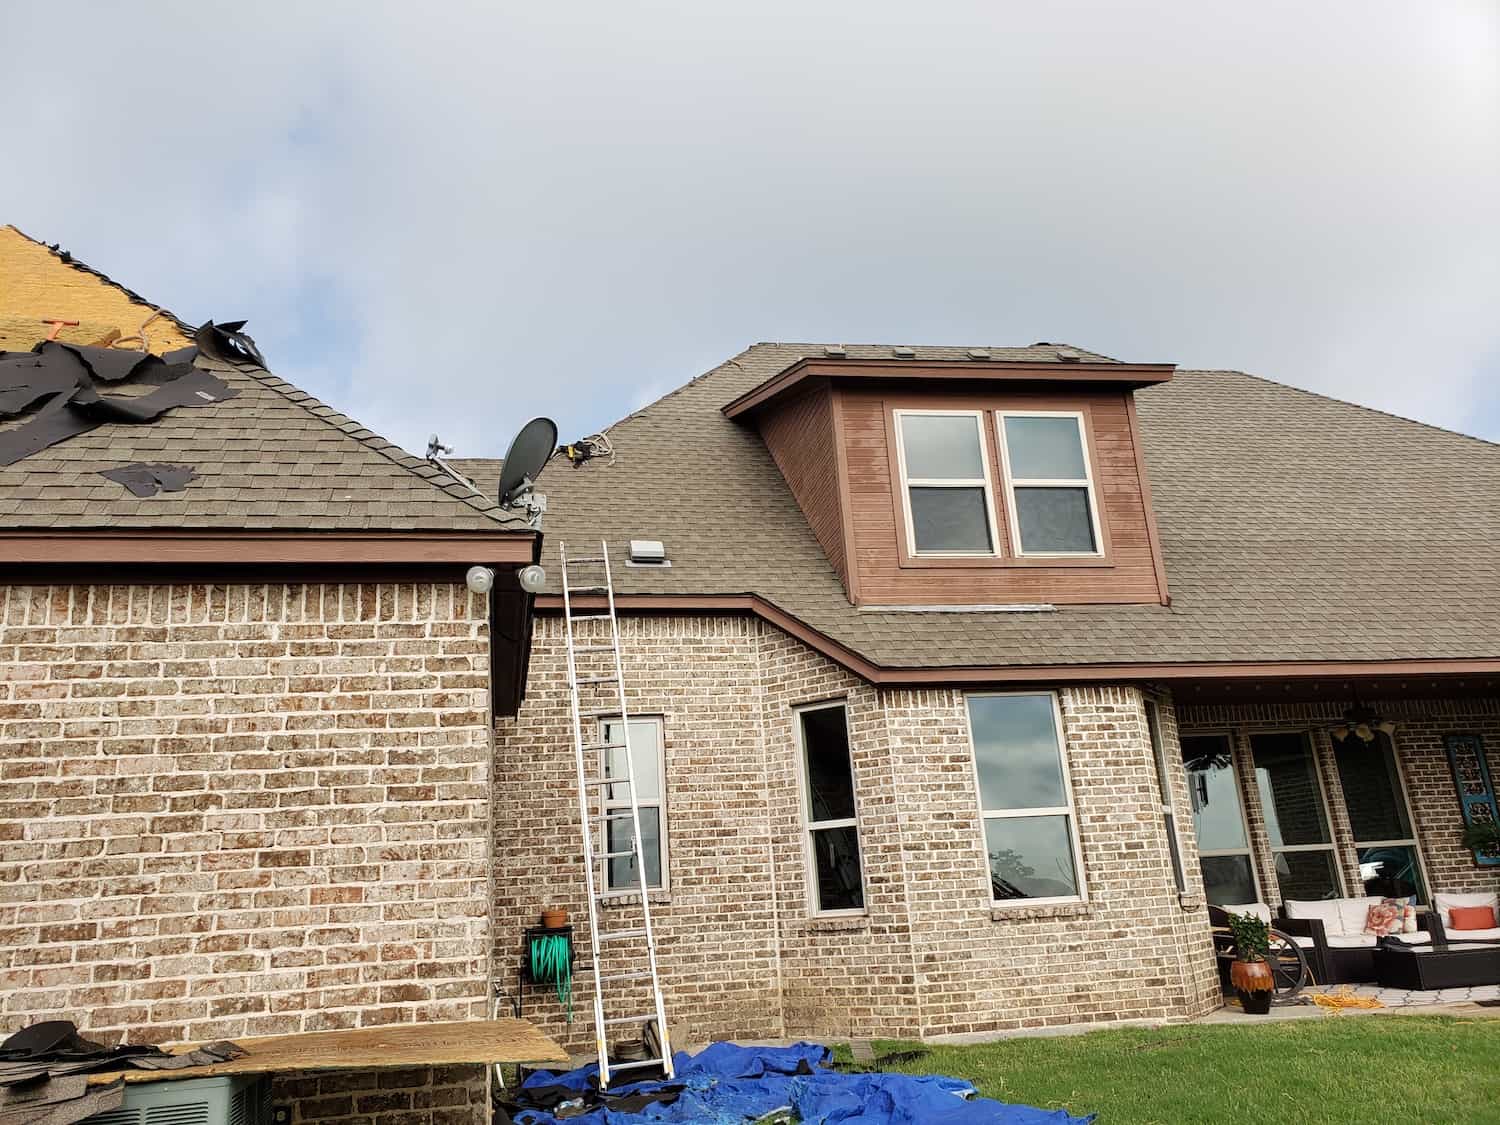 DFW Residential Roofing Project - Before